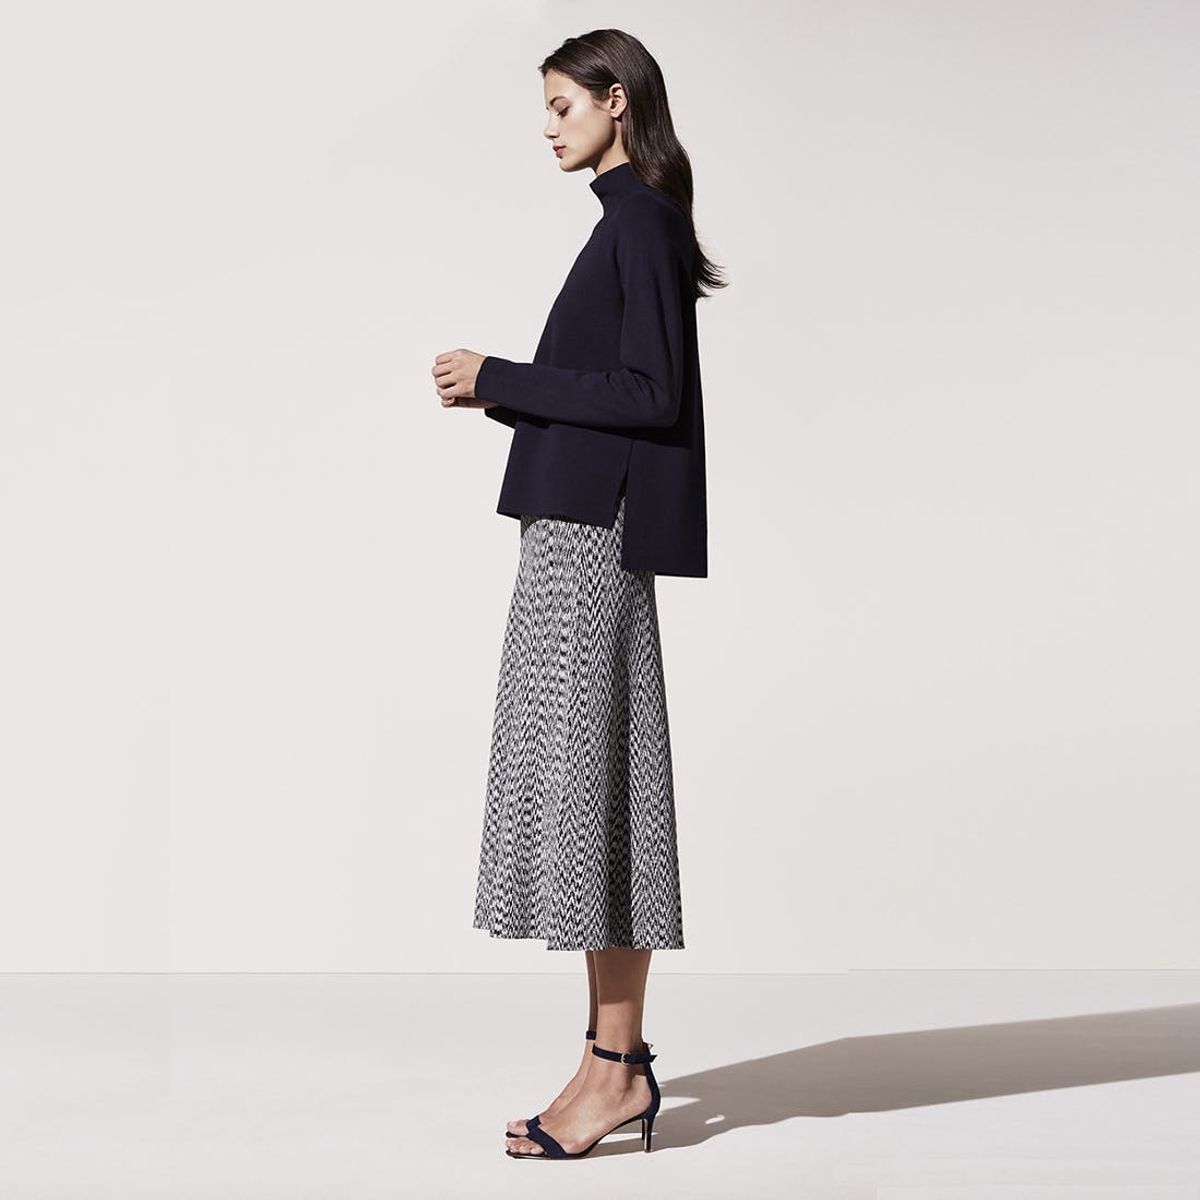 This New Collection Will Make You Want to Shop at Ann Taylor Again